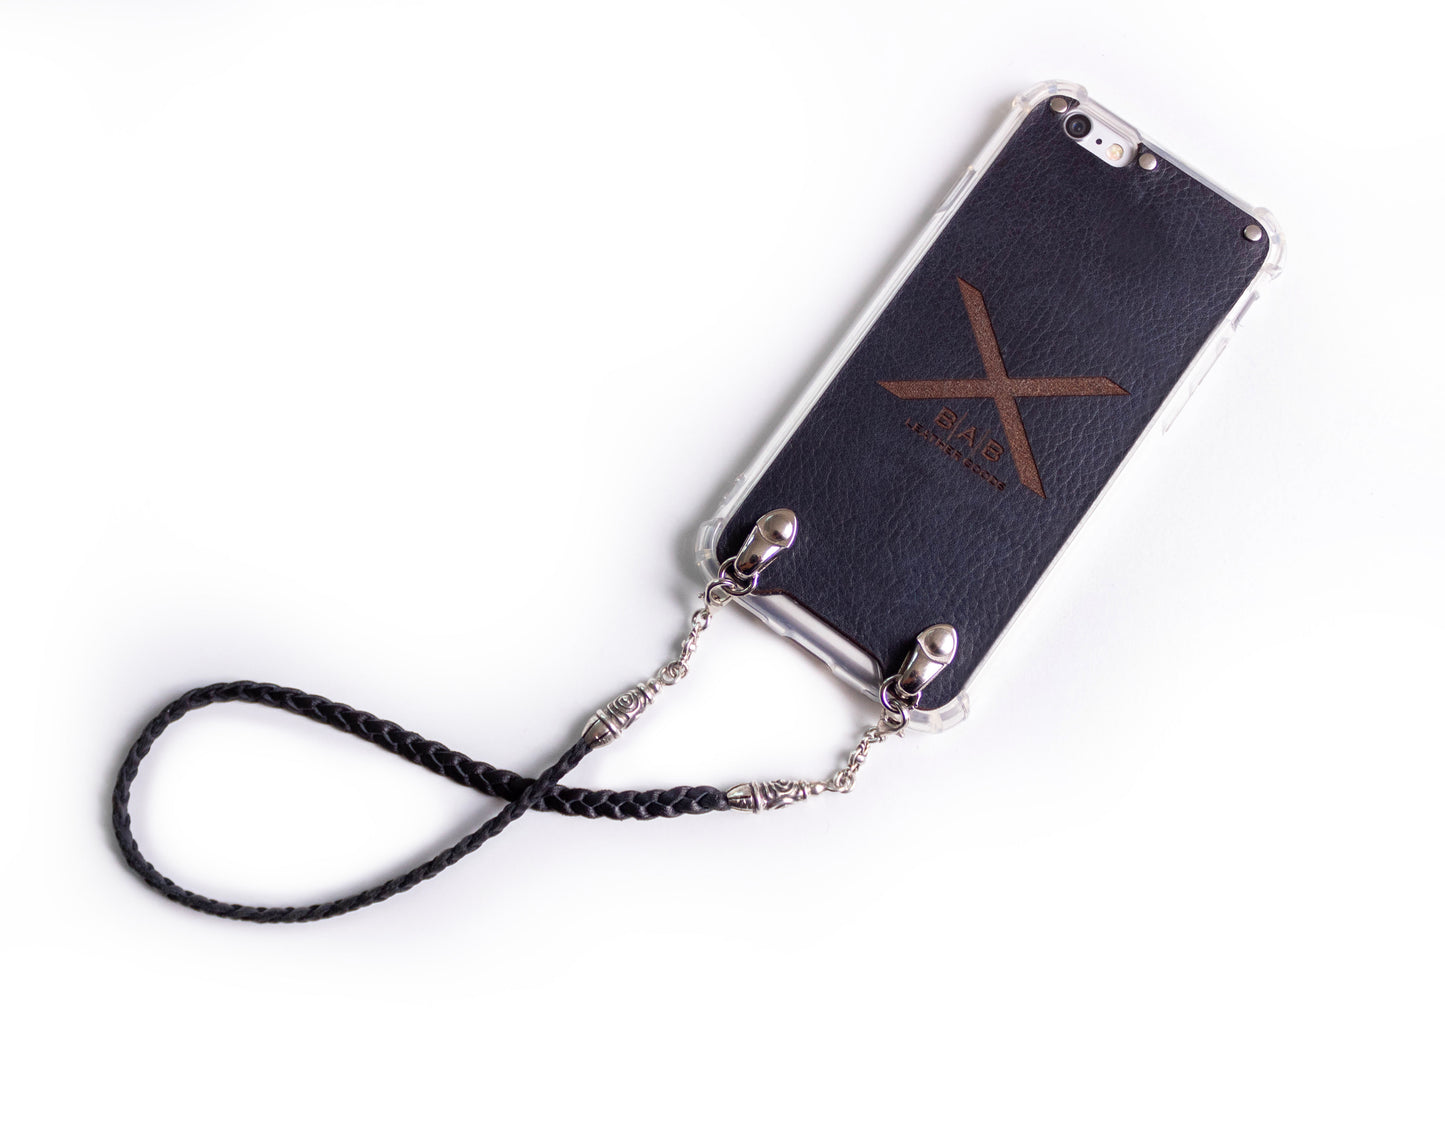 Full-Grain Genuine vegetal-tanned Leather & 925 Sterling Silver Case for iPhone. Bracelet/Choker/Strap three double strands of Hand-braided Leather, Brown or Black.- F17​